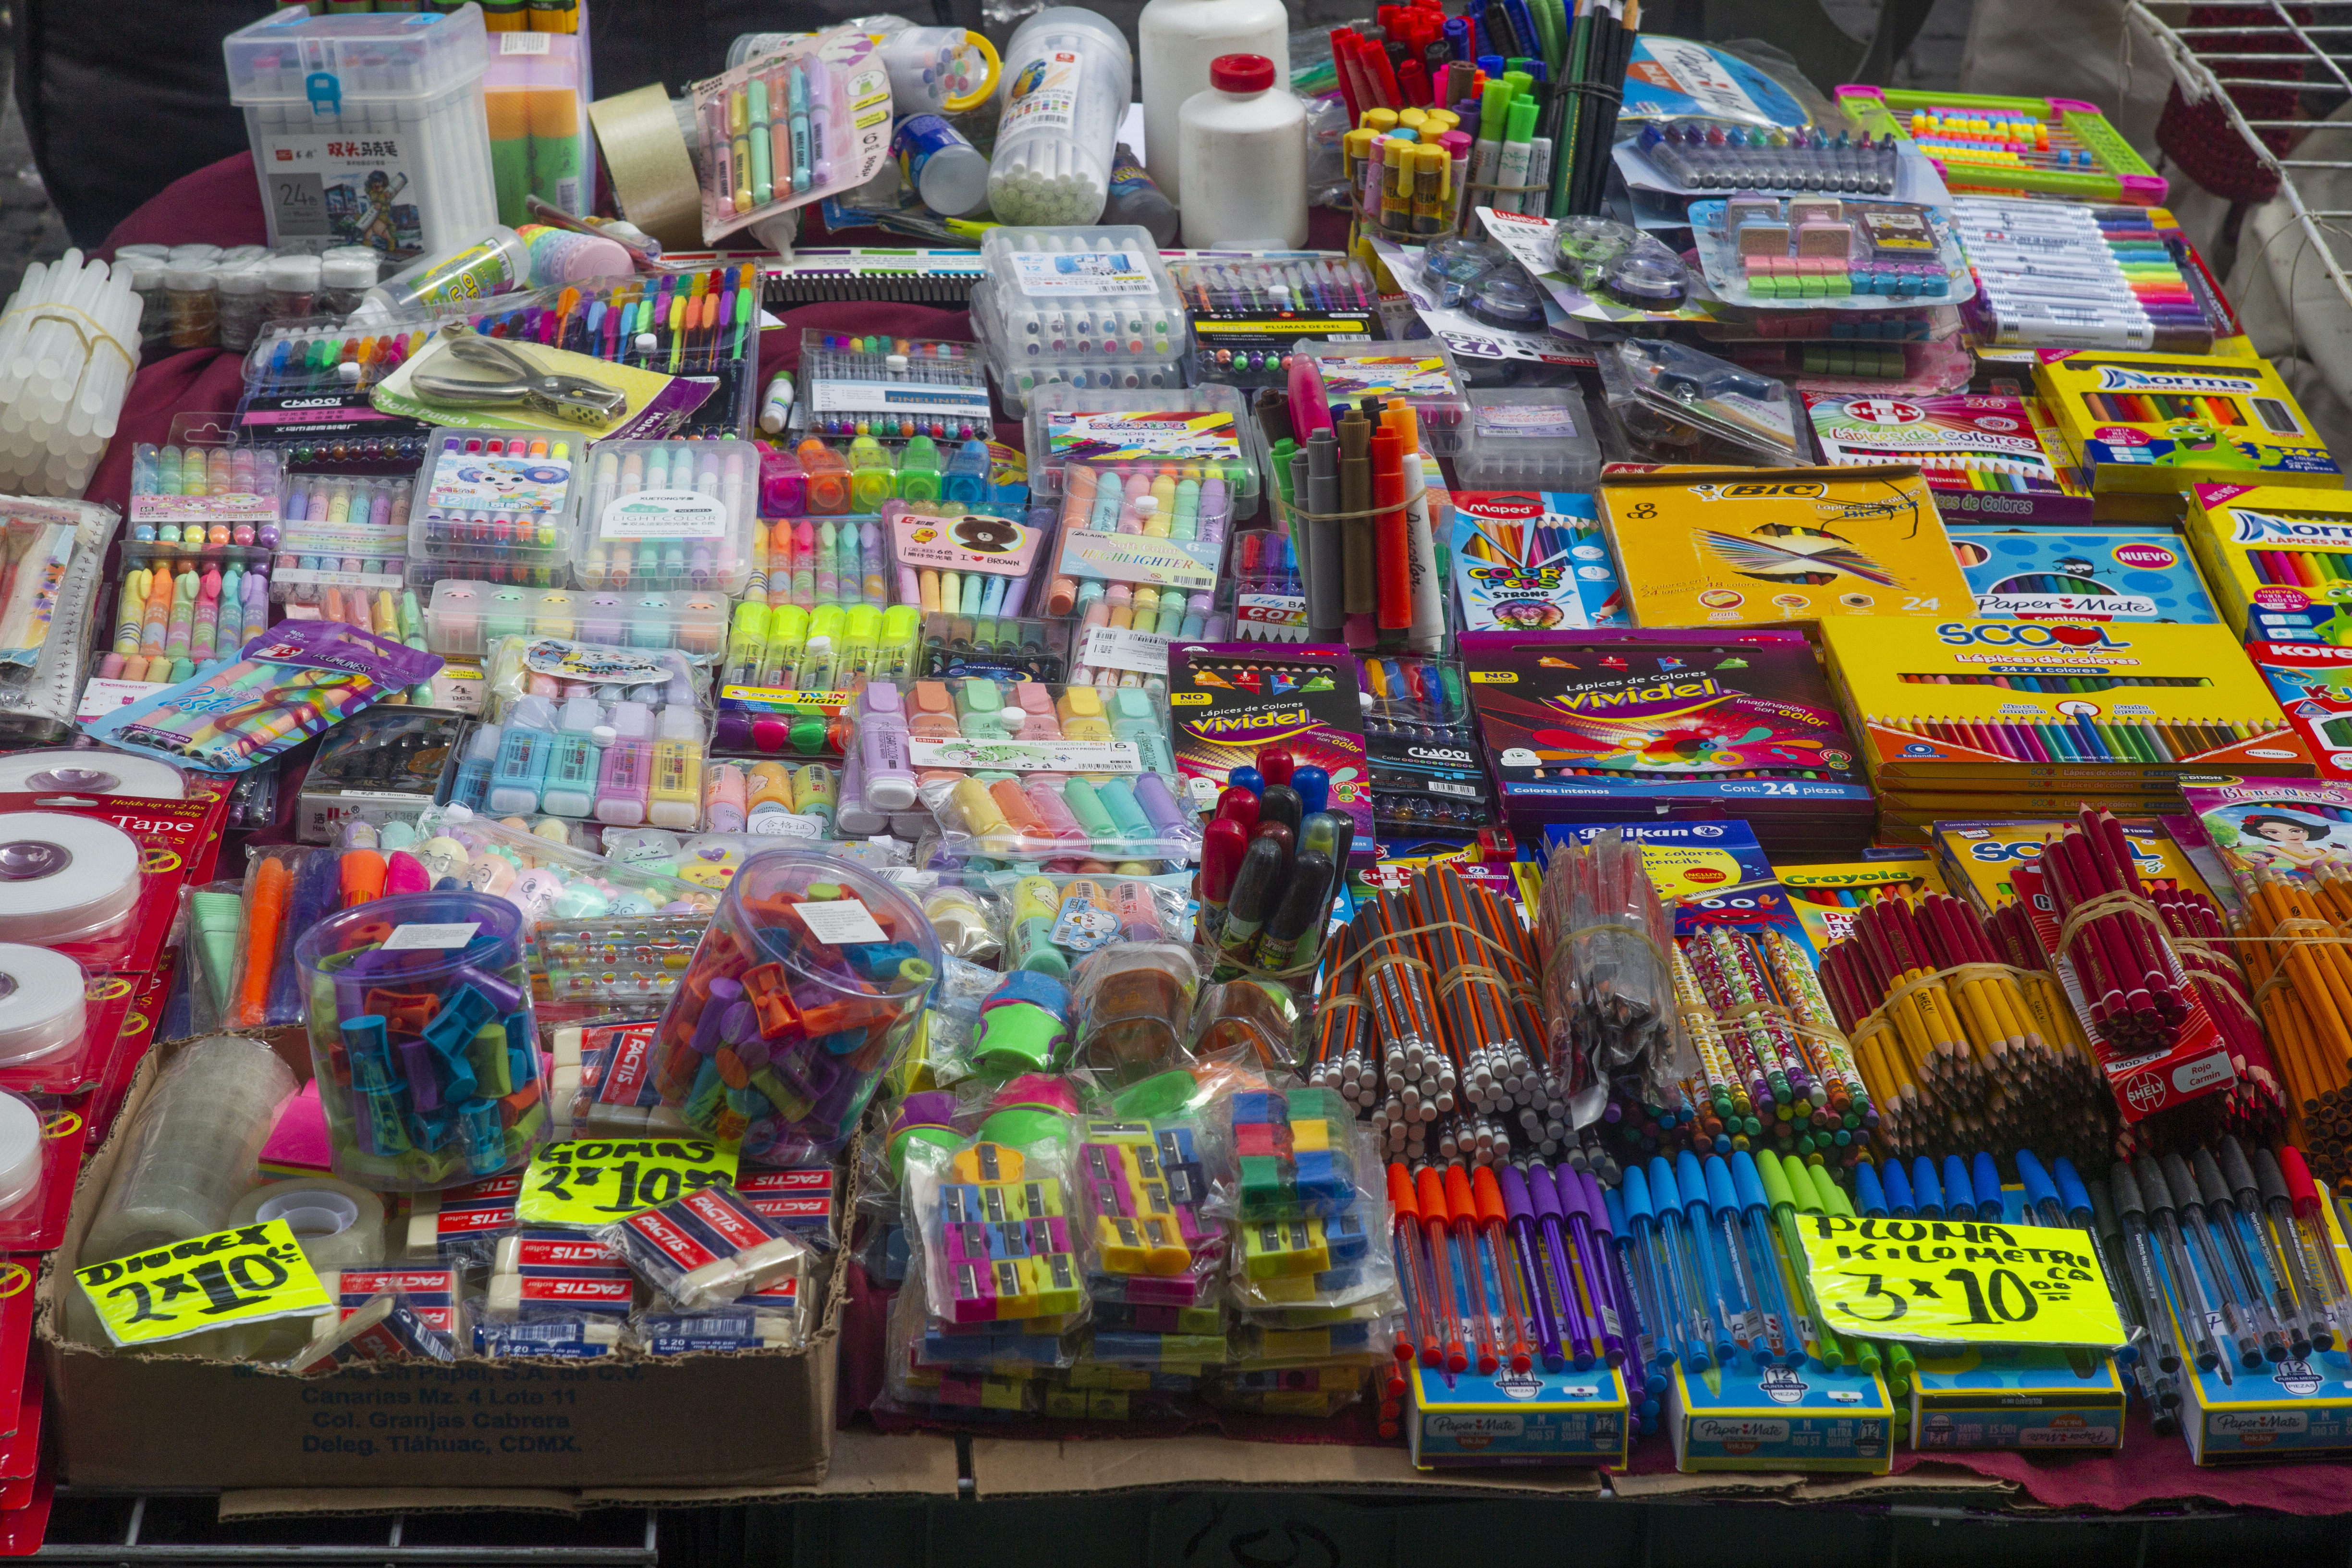 Profeco Released The Results Of A Study Conducted On Various Brands Of School Supplies (Photo: Karina Hernandez / Infobay)